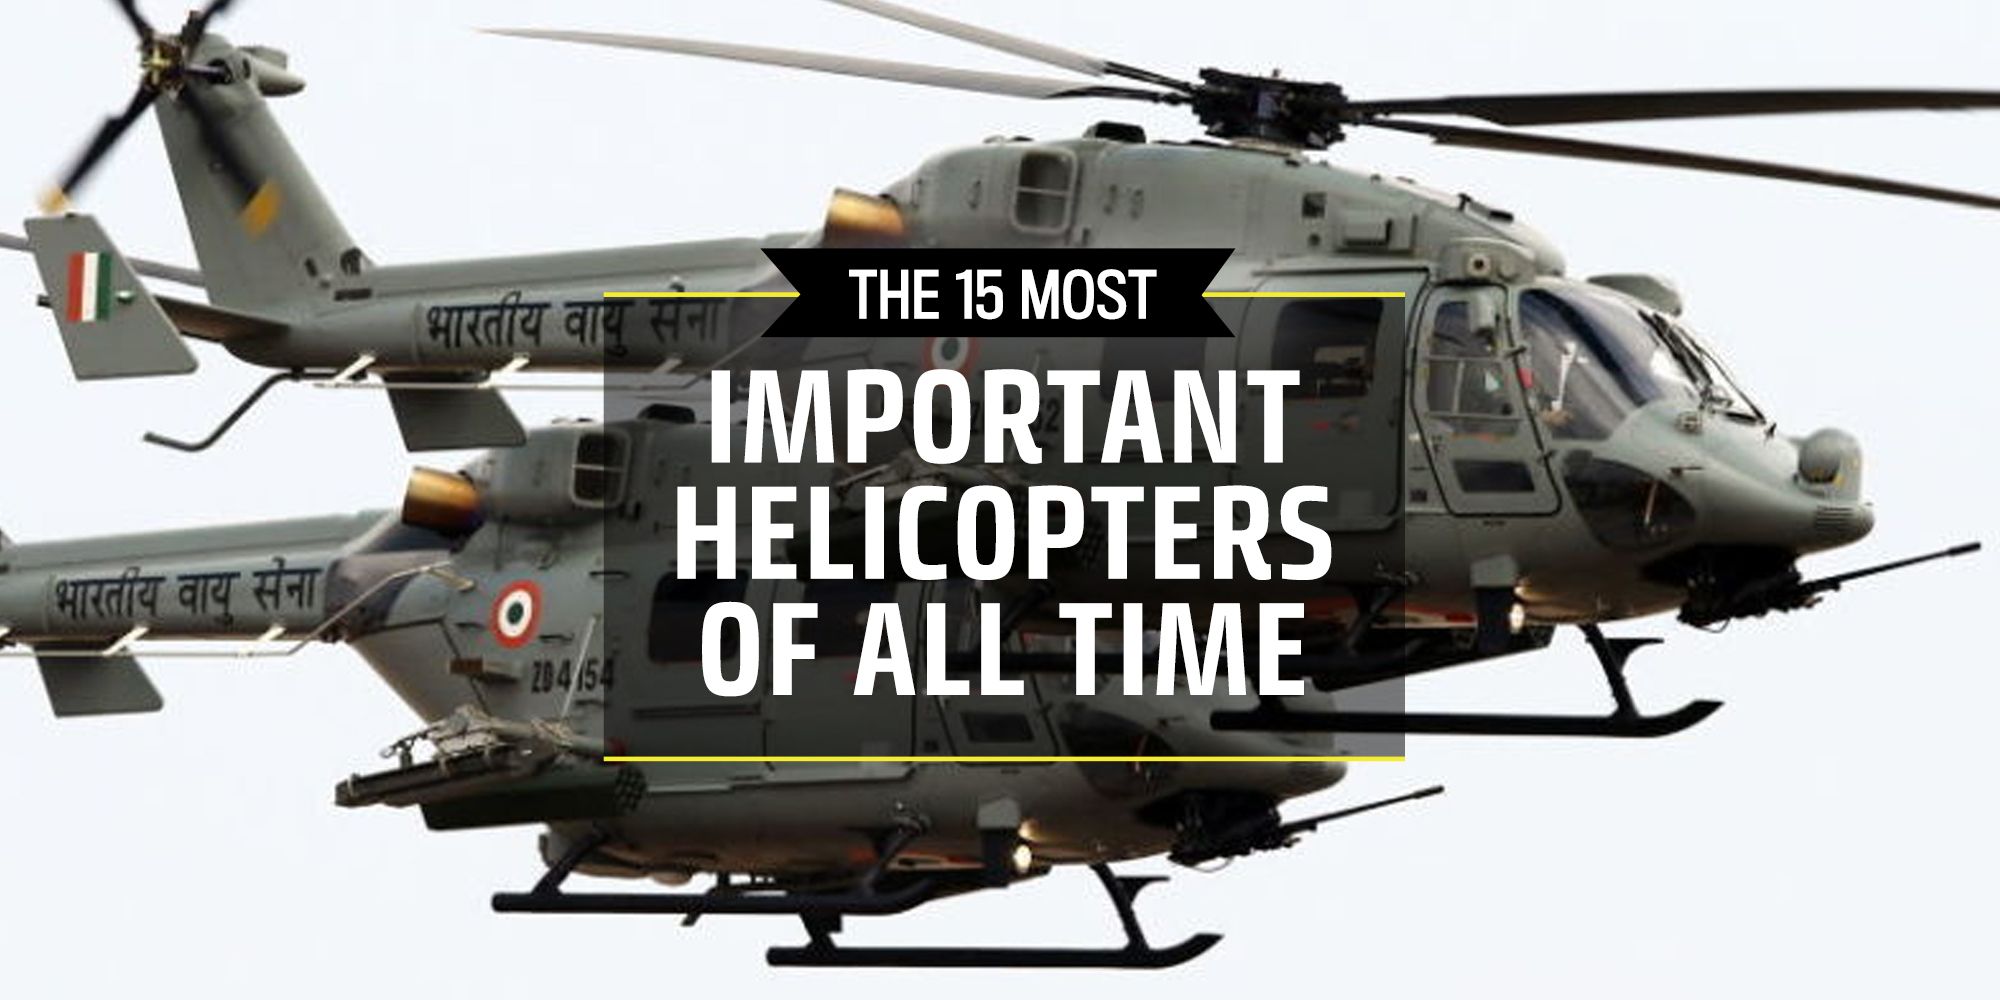 The 15 Most Important Helicopters